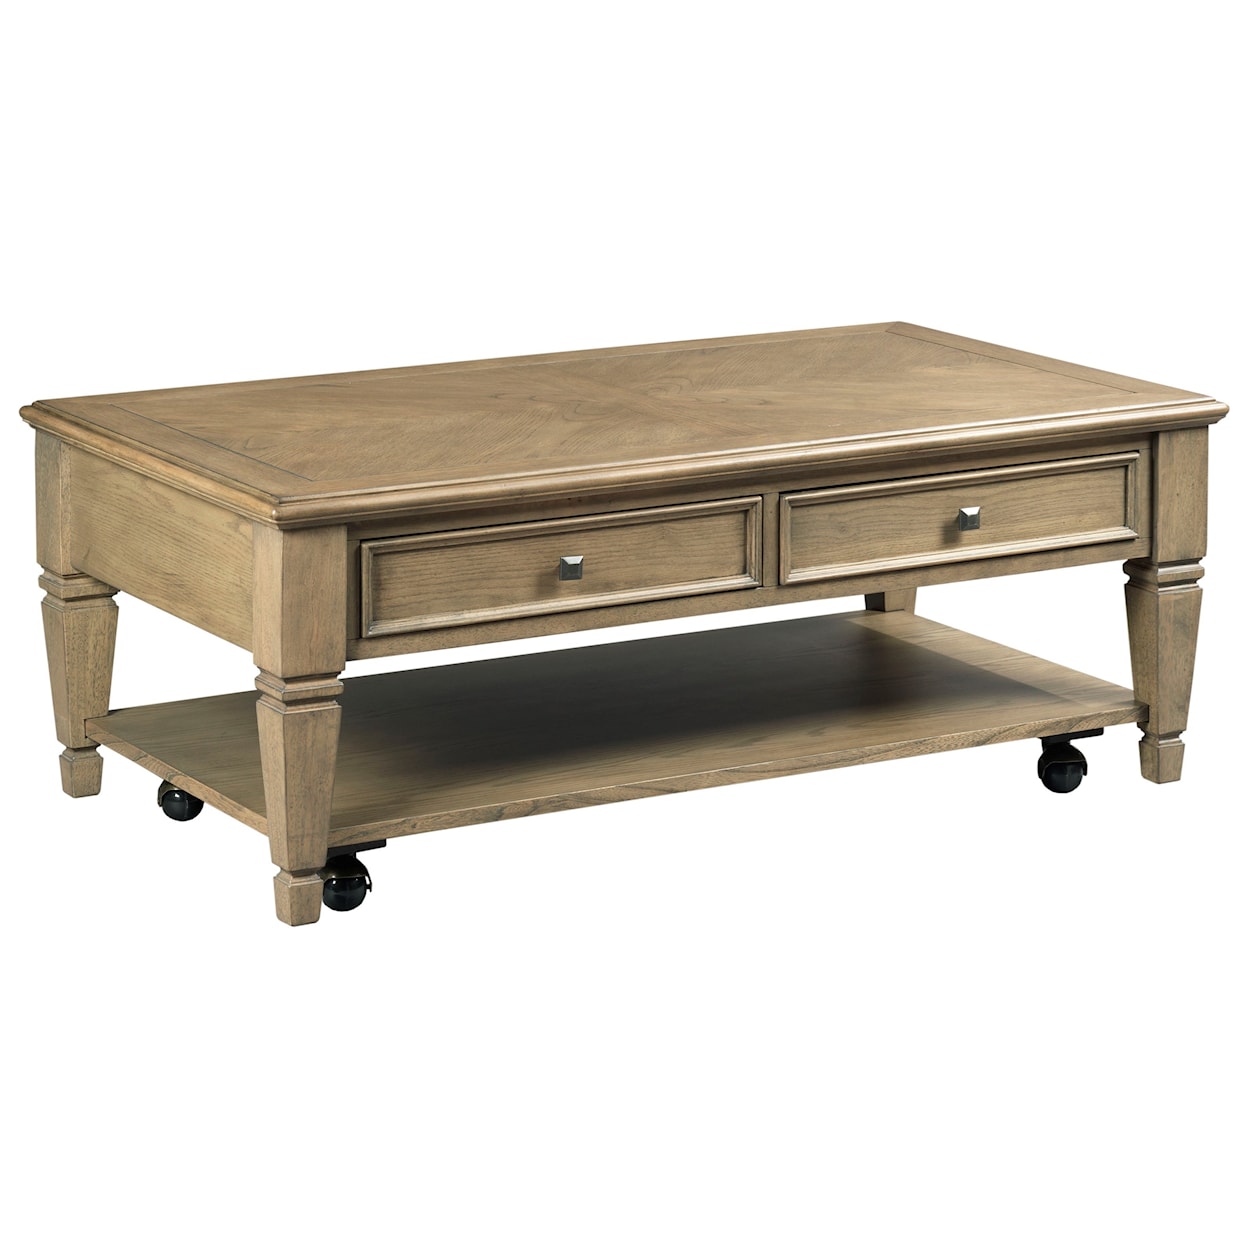 Dimensions Proximity Rectangular Cocktail Table